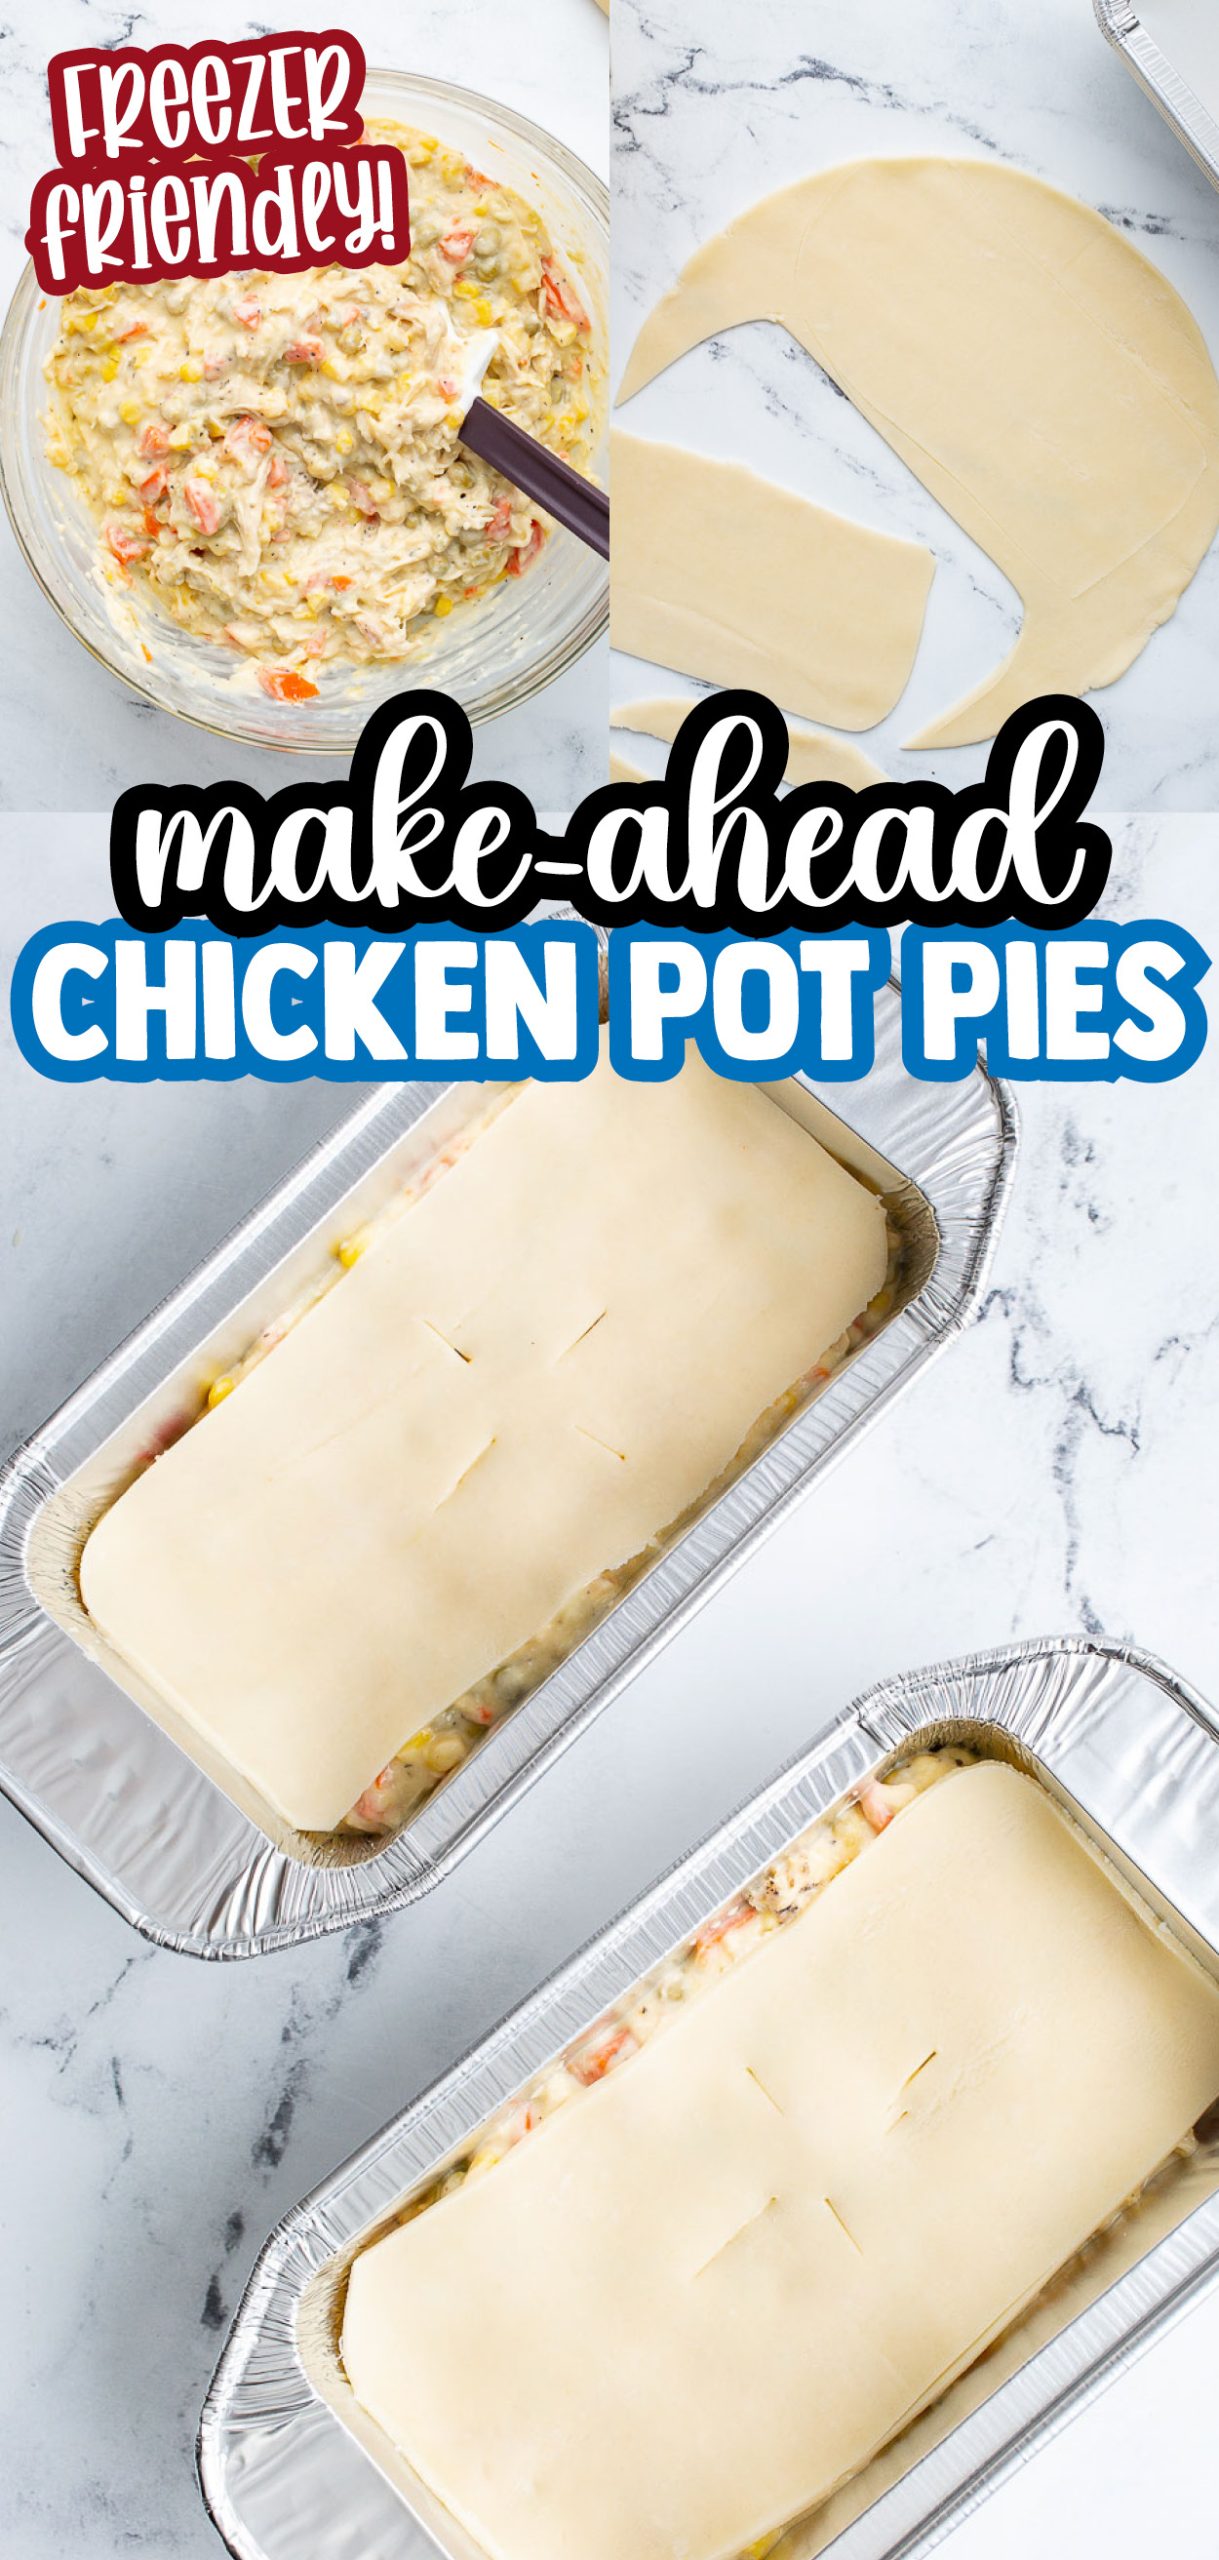 These mini pot pies are freezer-friendly, or you can bake them for dinner tonight!